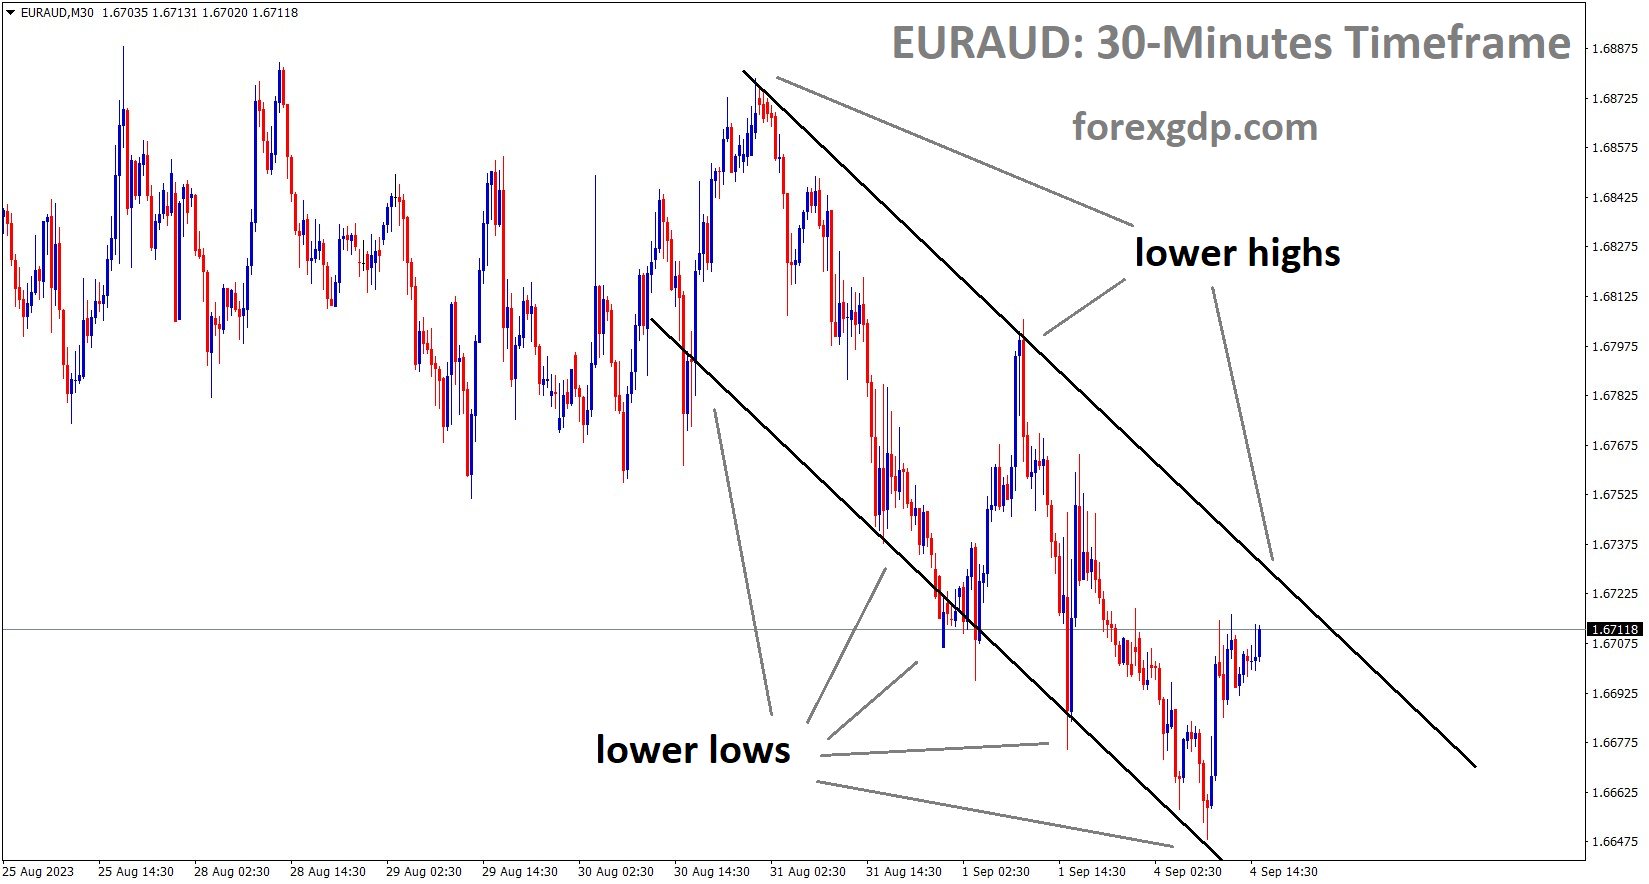 EURAUD M30 TF Analysis Market is moving in the Descending channel and the market has reached the lower high area of the channel